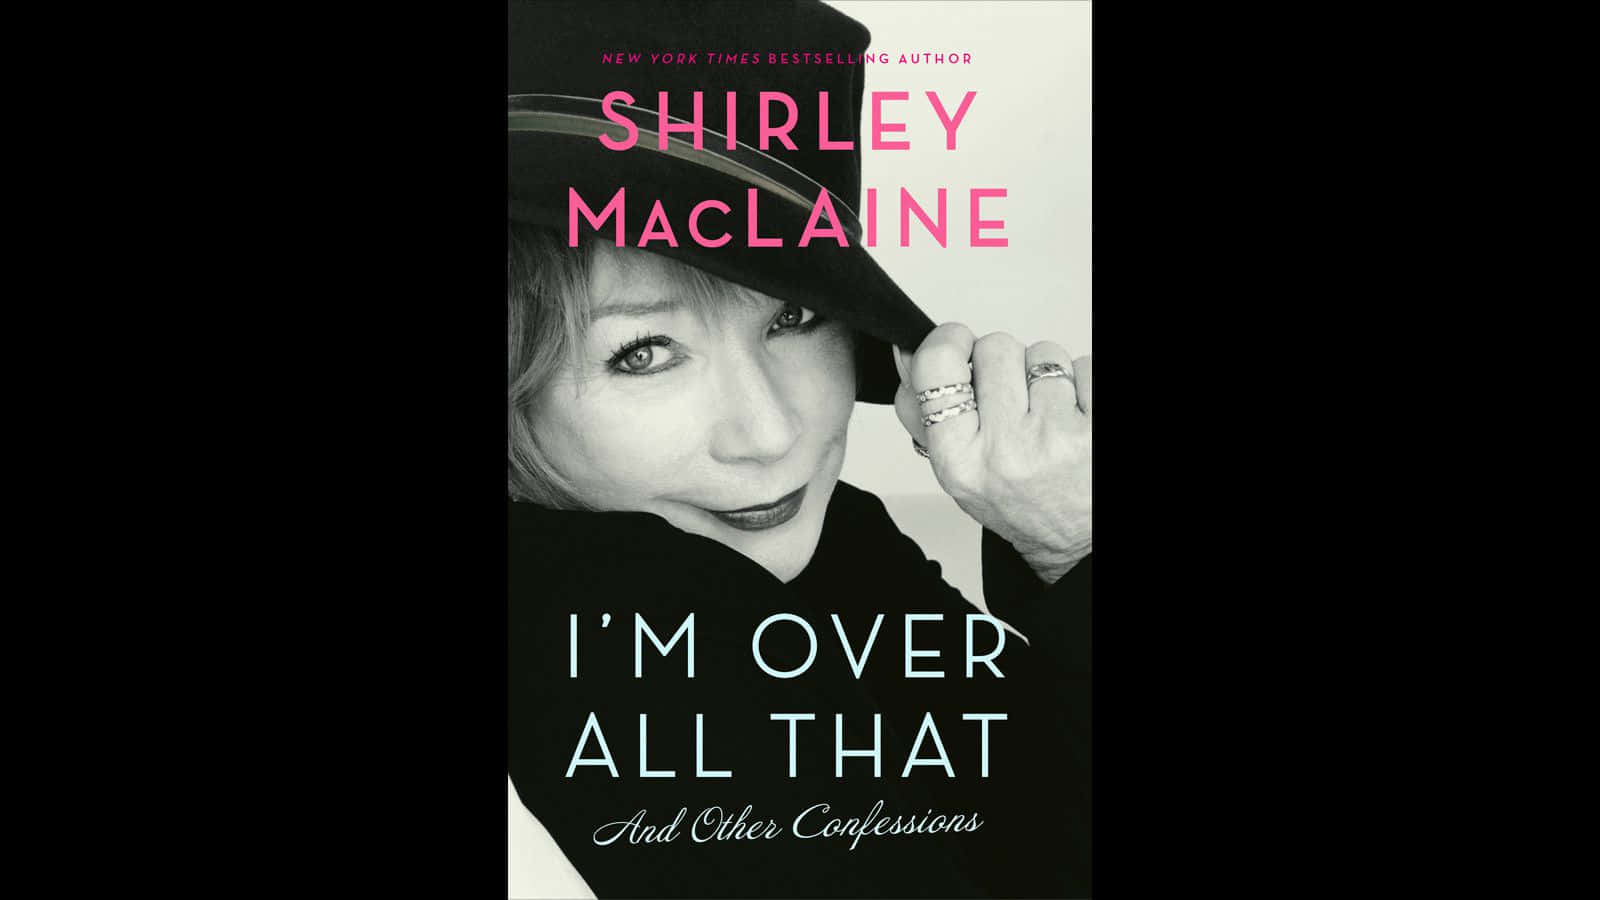 Actress And Author Shirley Maclaine Poses On The Cover Of Her Book 'i'm Over All That'. Background